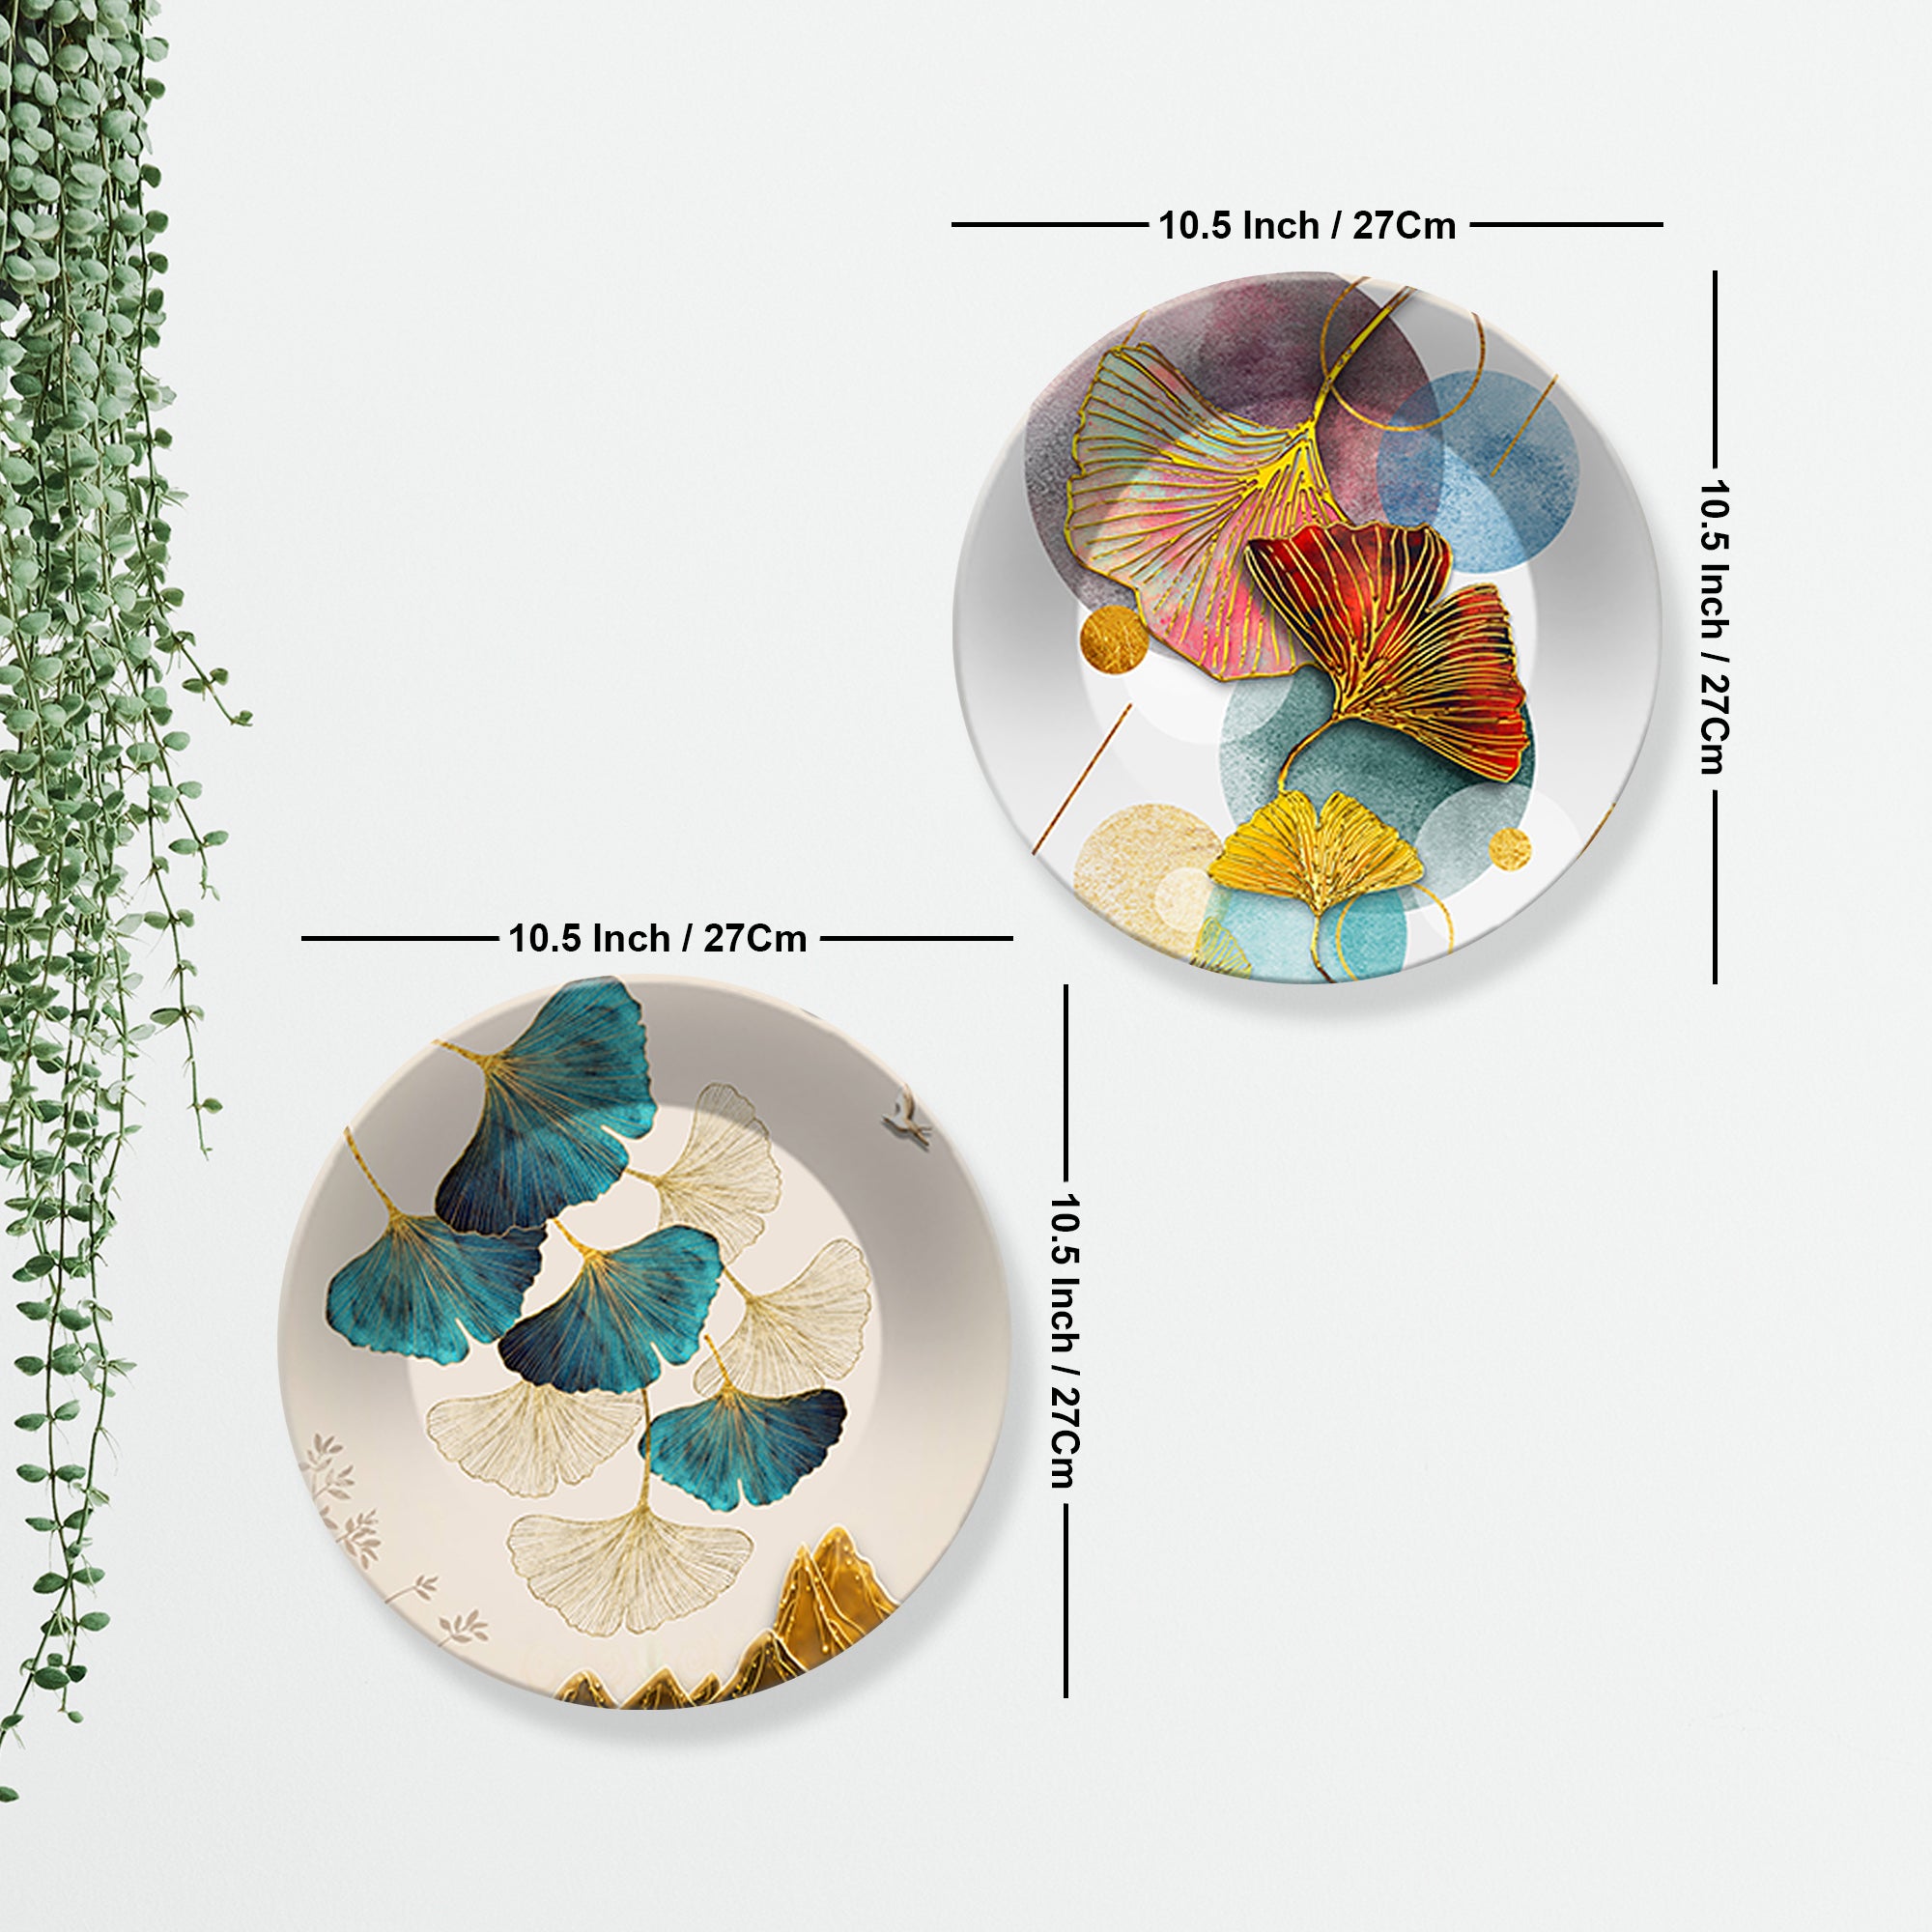 Colorful Wall Hanging Plates of Two Pieces